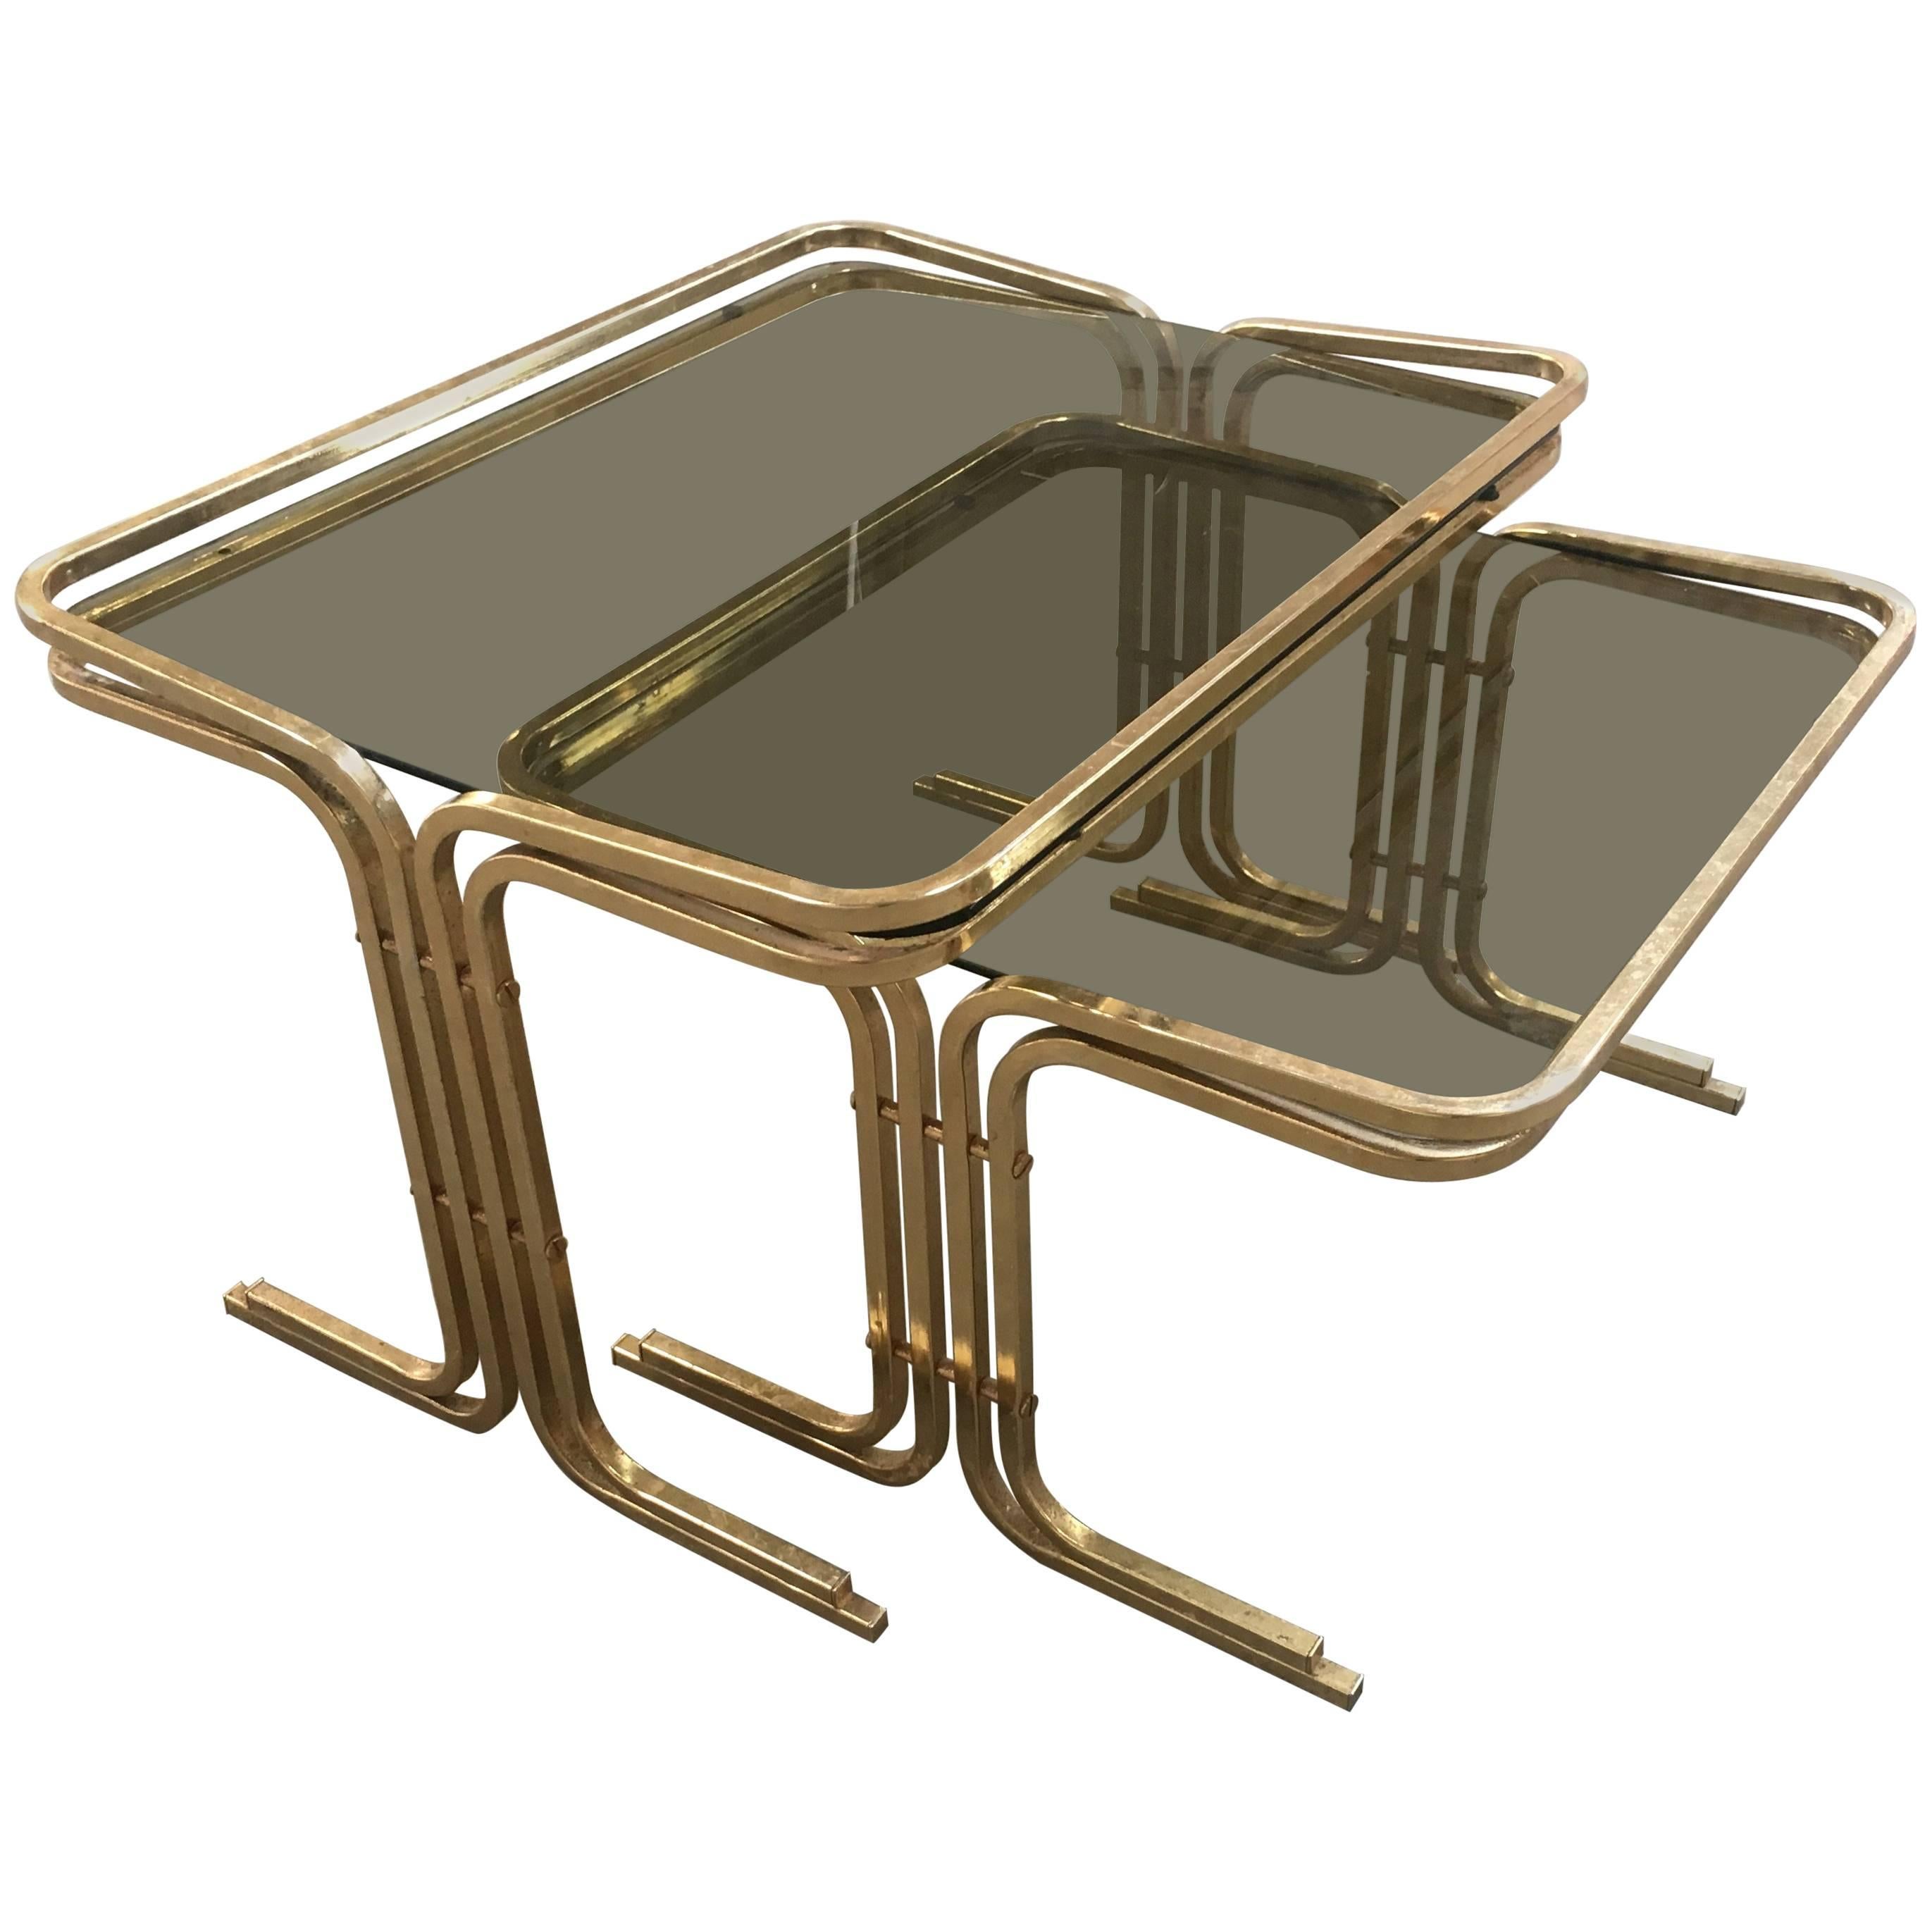 Set of Two Italian Brass Metal Nesting Table with Smoked Glass Top from 1970s